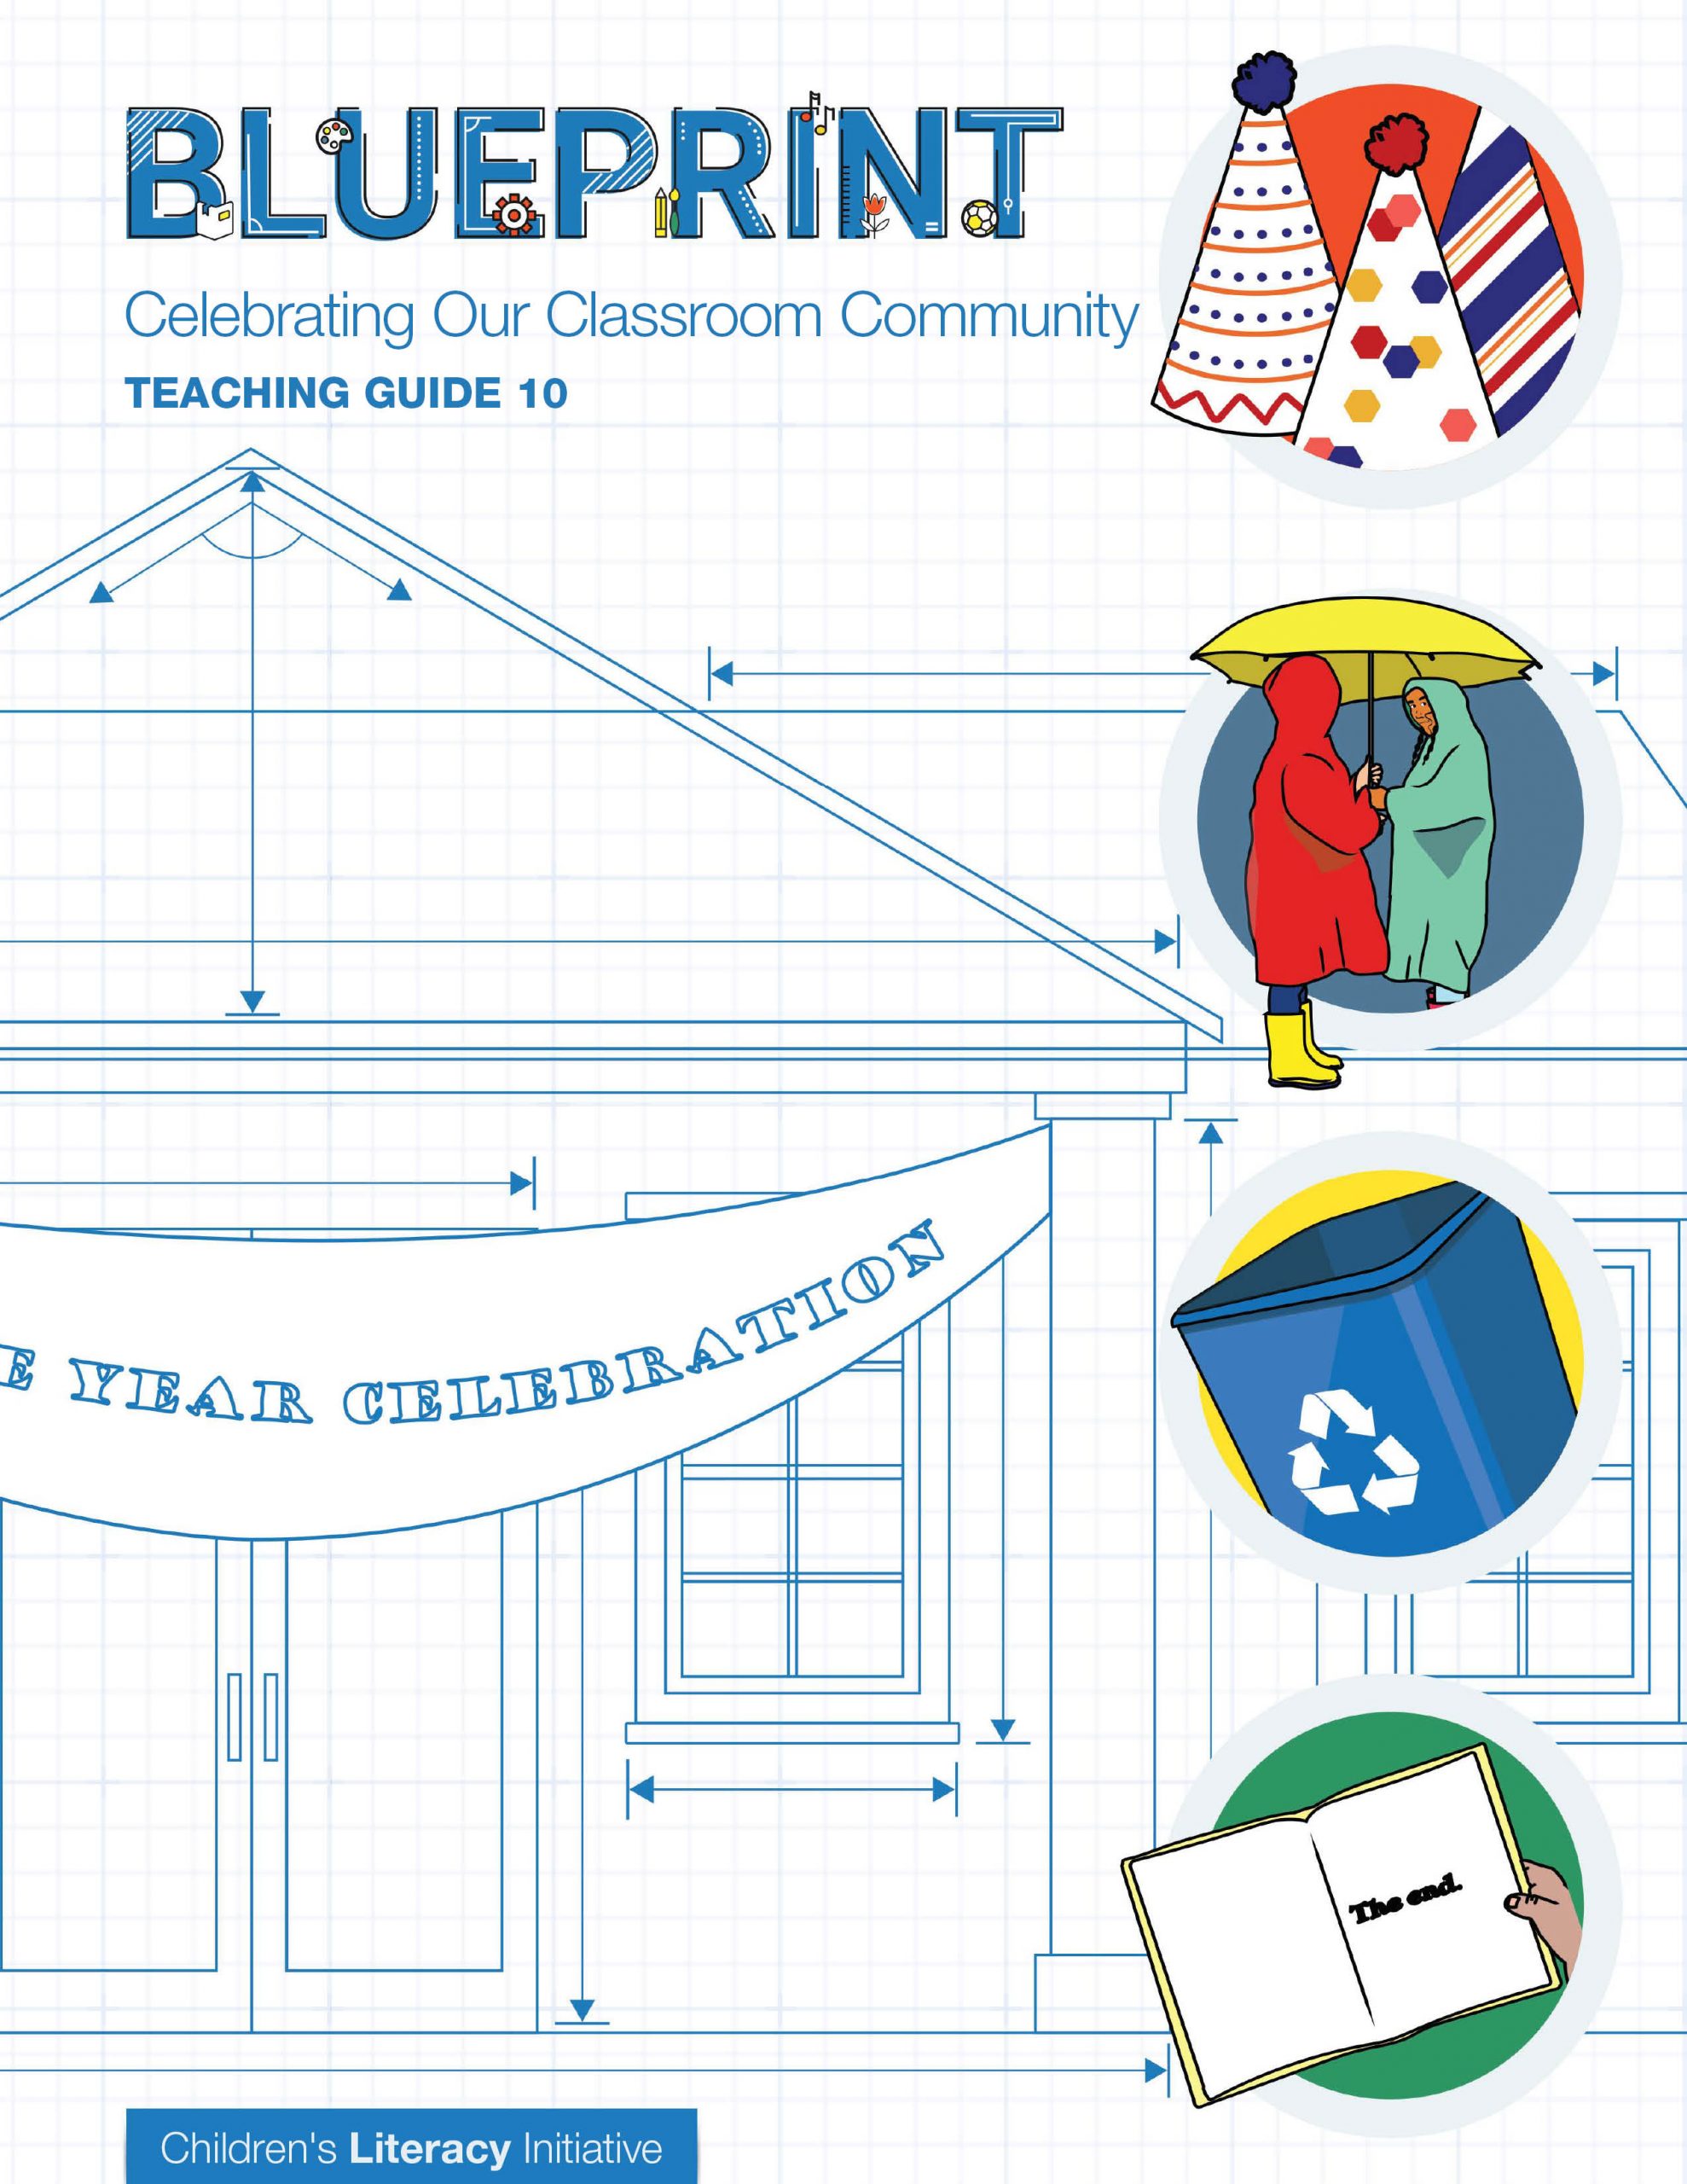 Celebrating Our Classroom Community